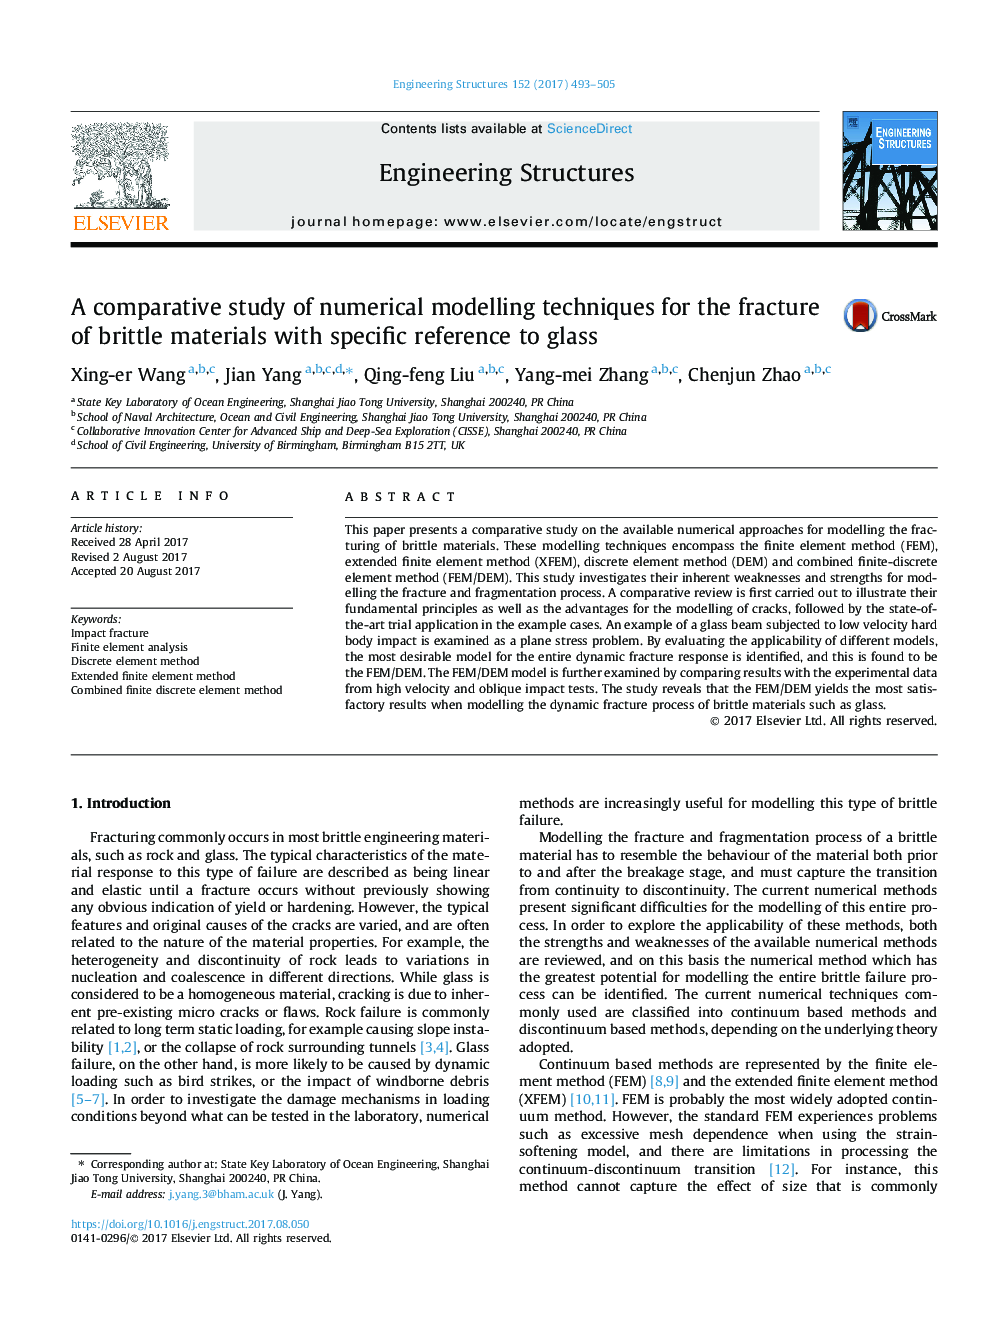 A comparative study of numerical modelling techniques for the fracture of brittle materials with specific reference to glass